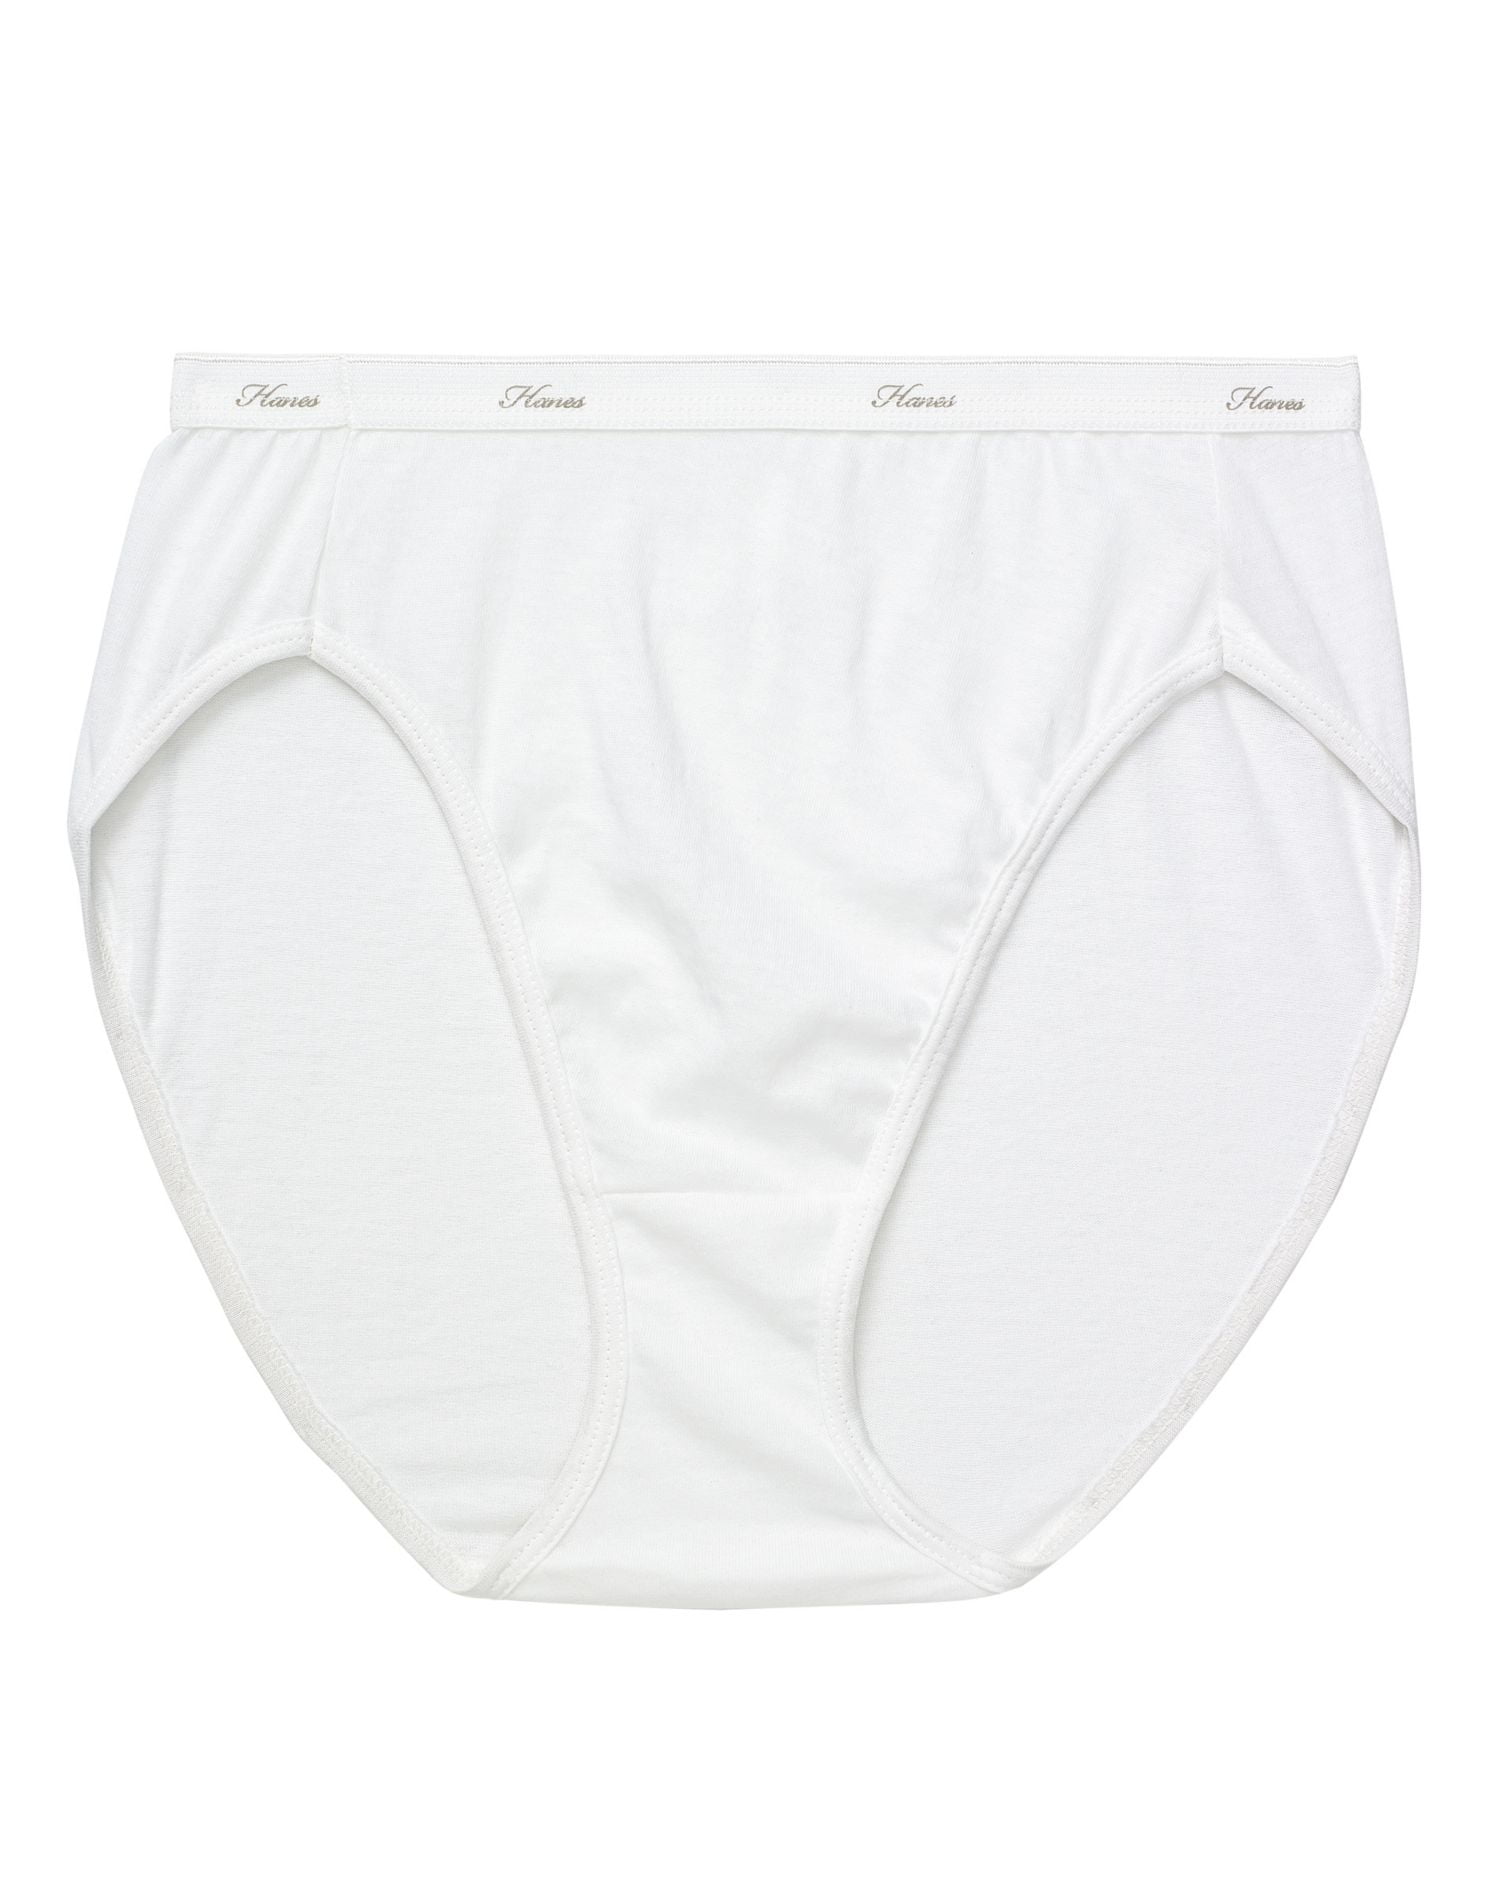 Hanes Women's Soft Cotton Tagless Hi Cut Panty, Multiple Pack Sizes  Available, Assorted 10-Pack, 6 : Buy Online at Best Price in KSA - Souq is  now : Fashion